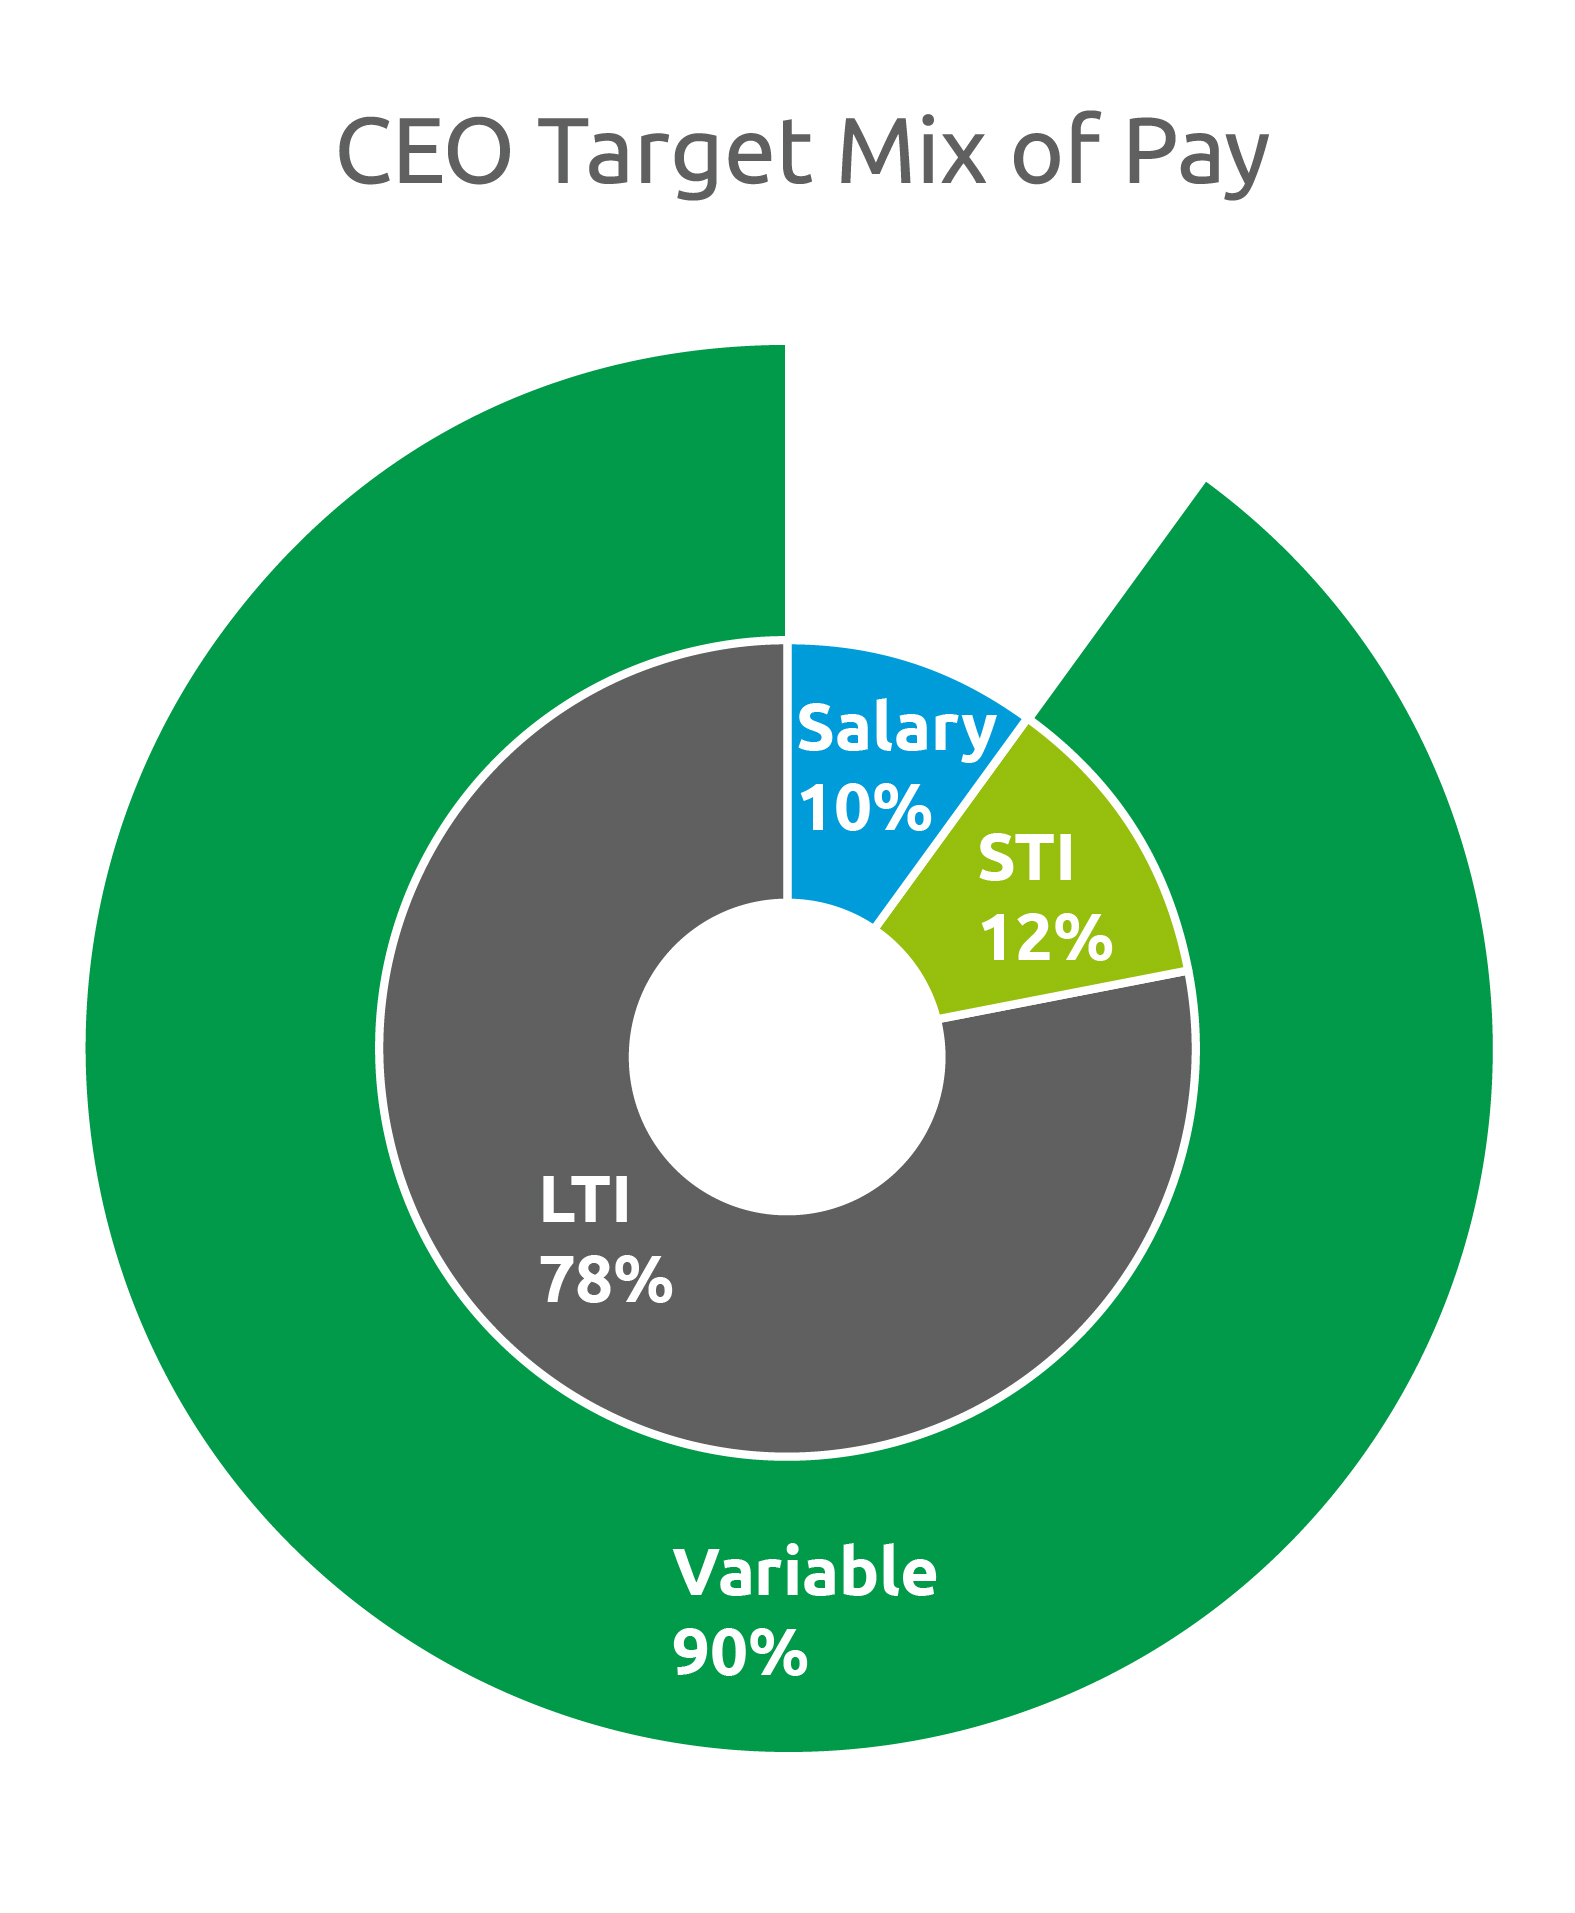 Pie-Charts_CEO-Target-Mix-Pay-23.jpg